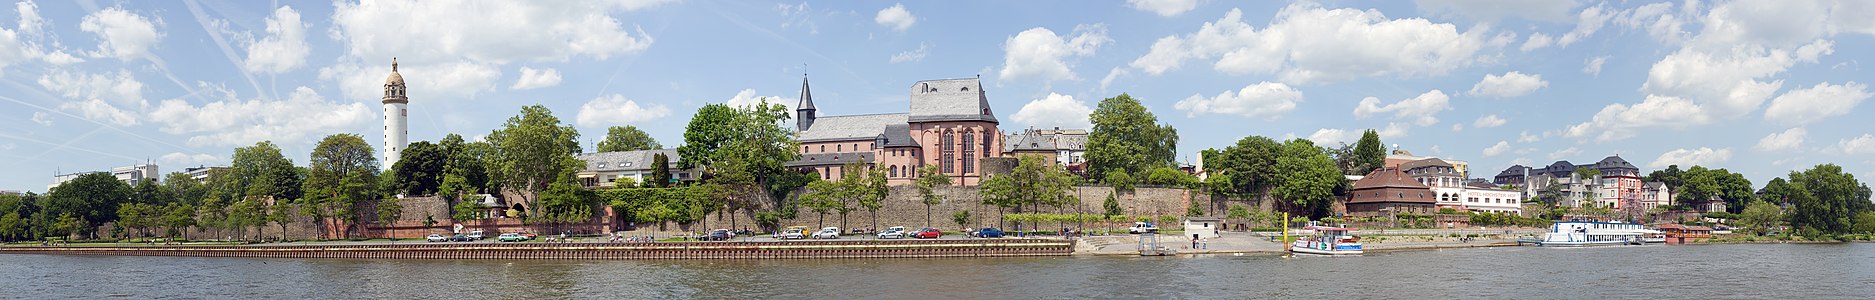 Frankfurt on the Main: Waterside of the district Hoechst as seen from the southern side of the Main